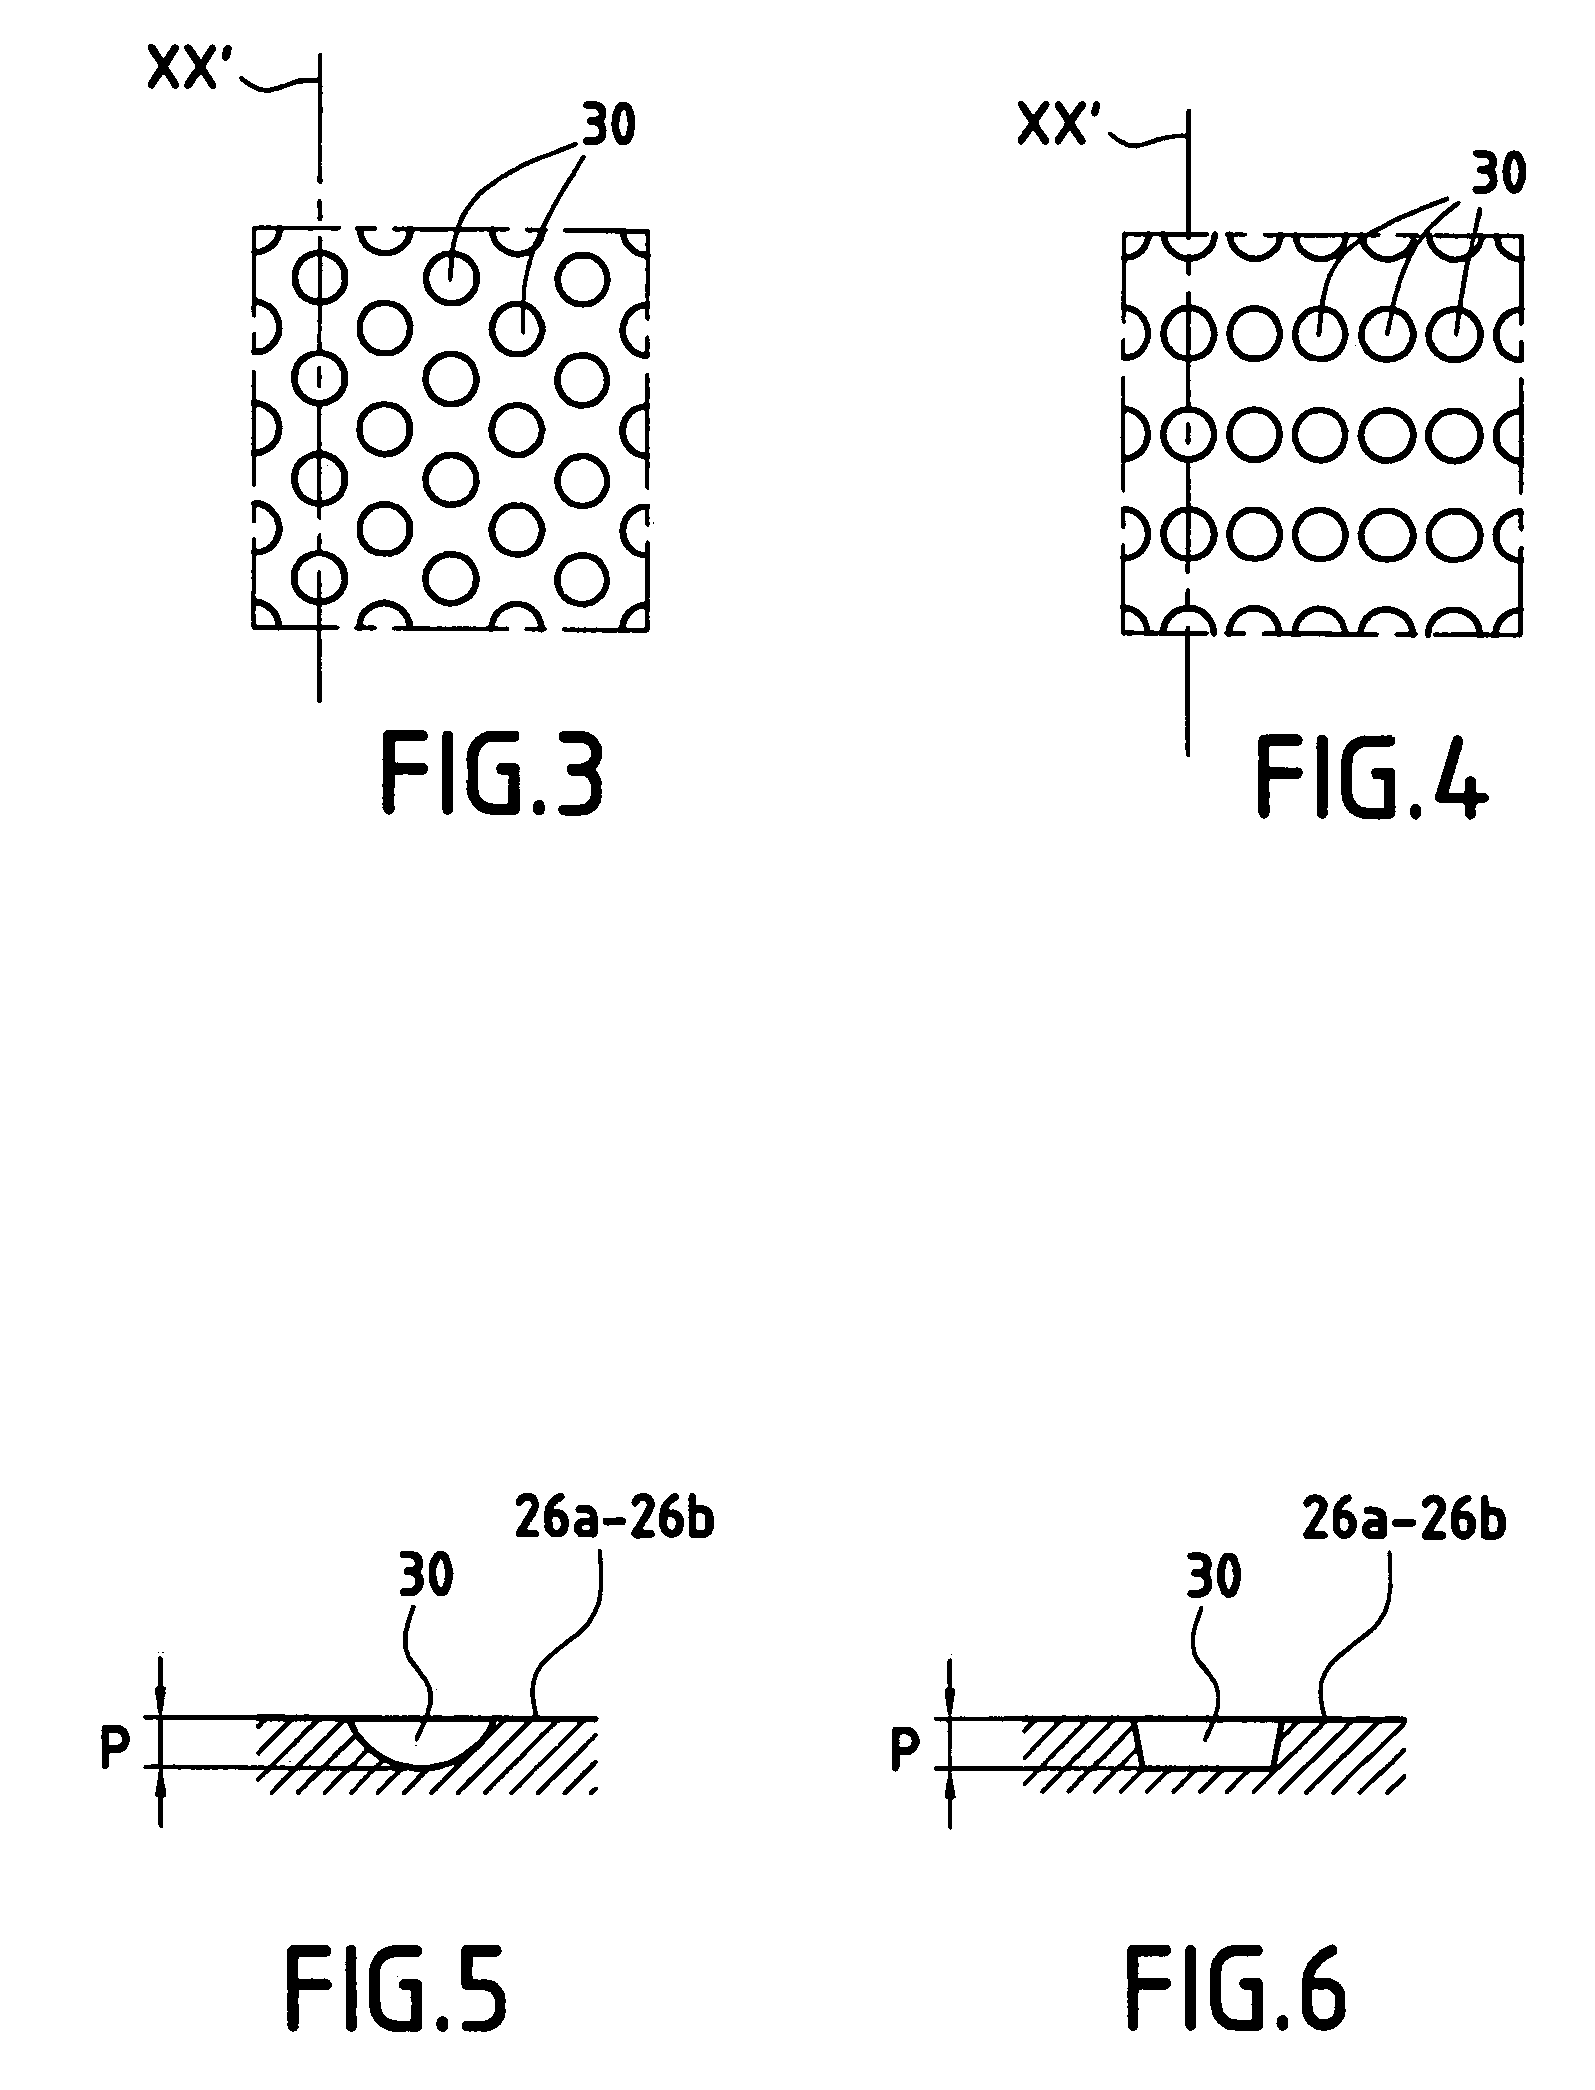 Gas turbine blade cooling circuit having a cavity with a high aspect ratio